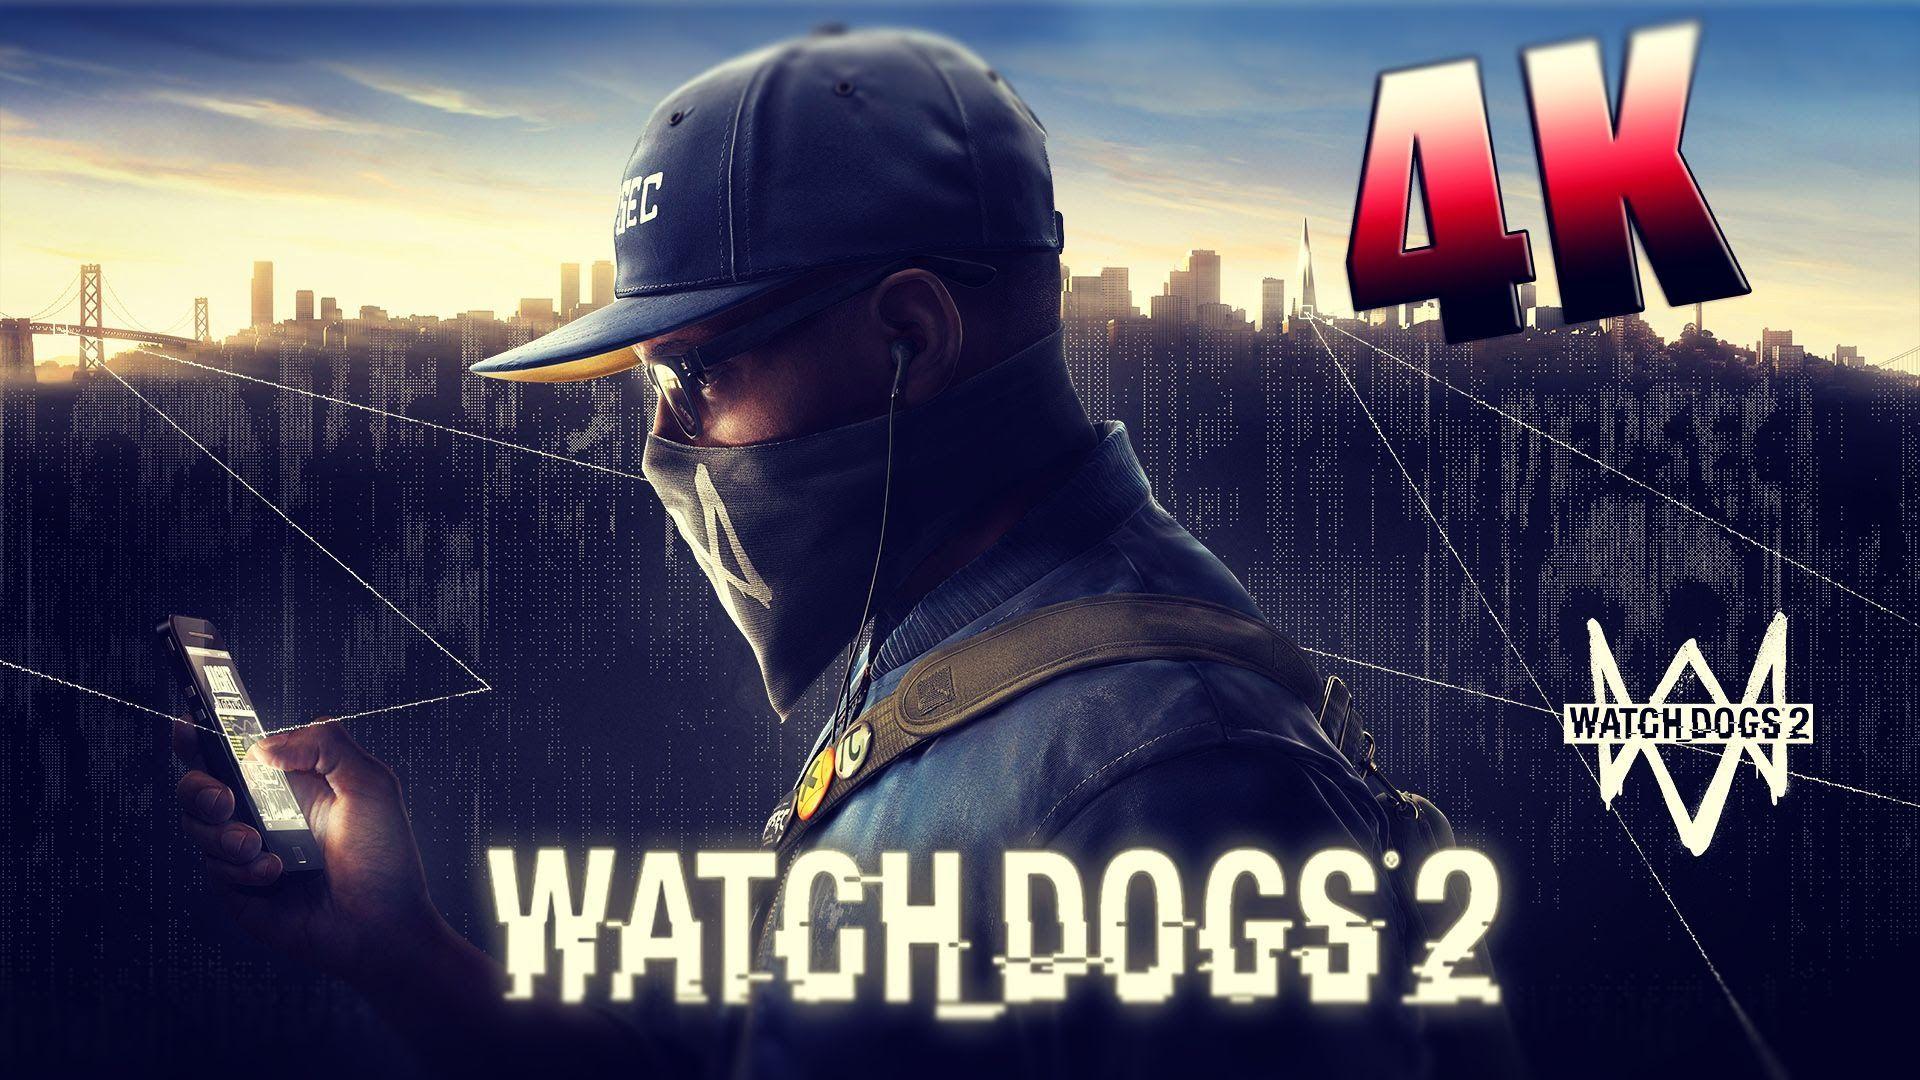 watch dogs 2 download free gtx 1070